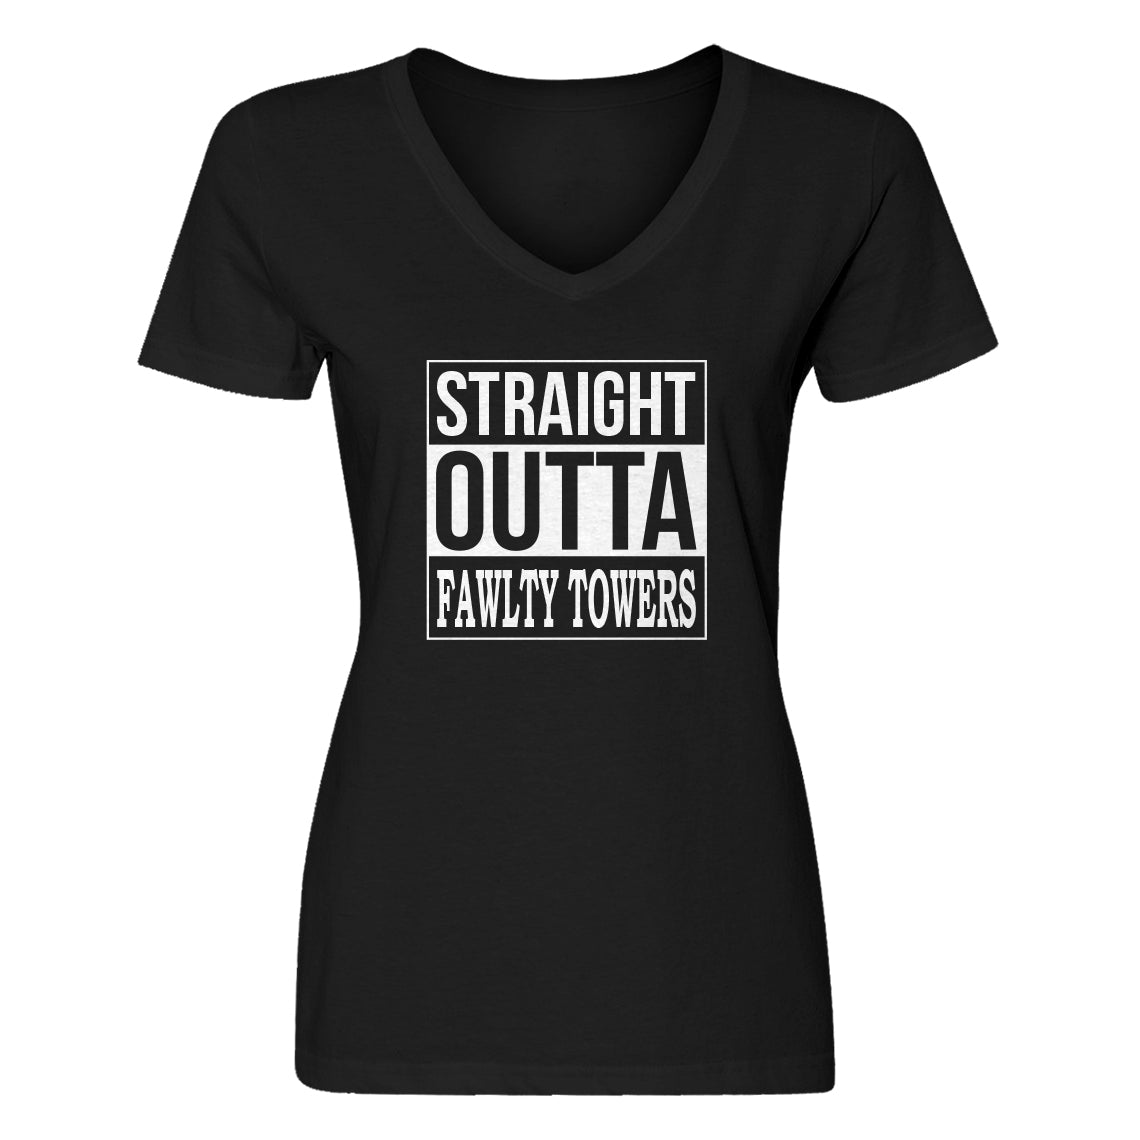 Womens Straight Outta Fawlty Towers V-Neck T-shirt